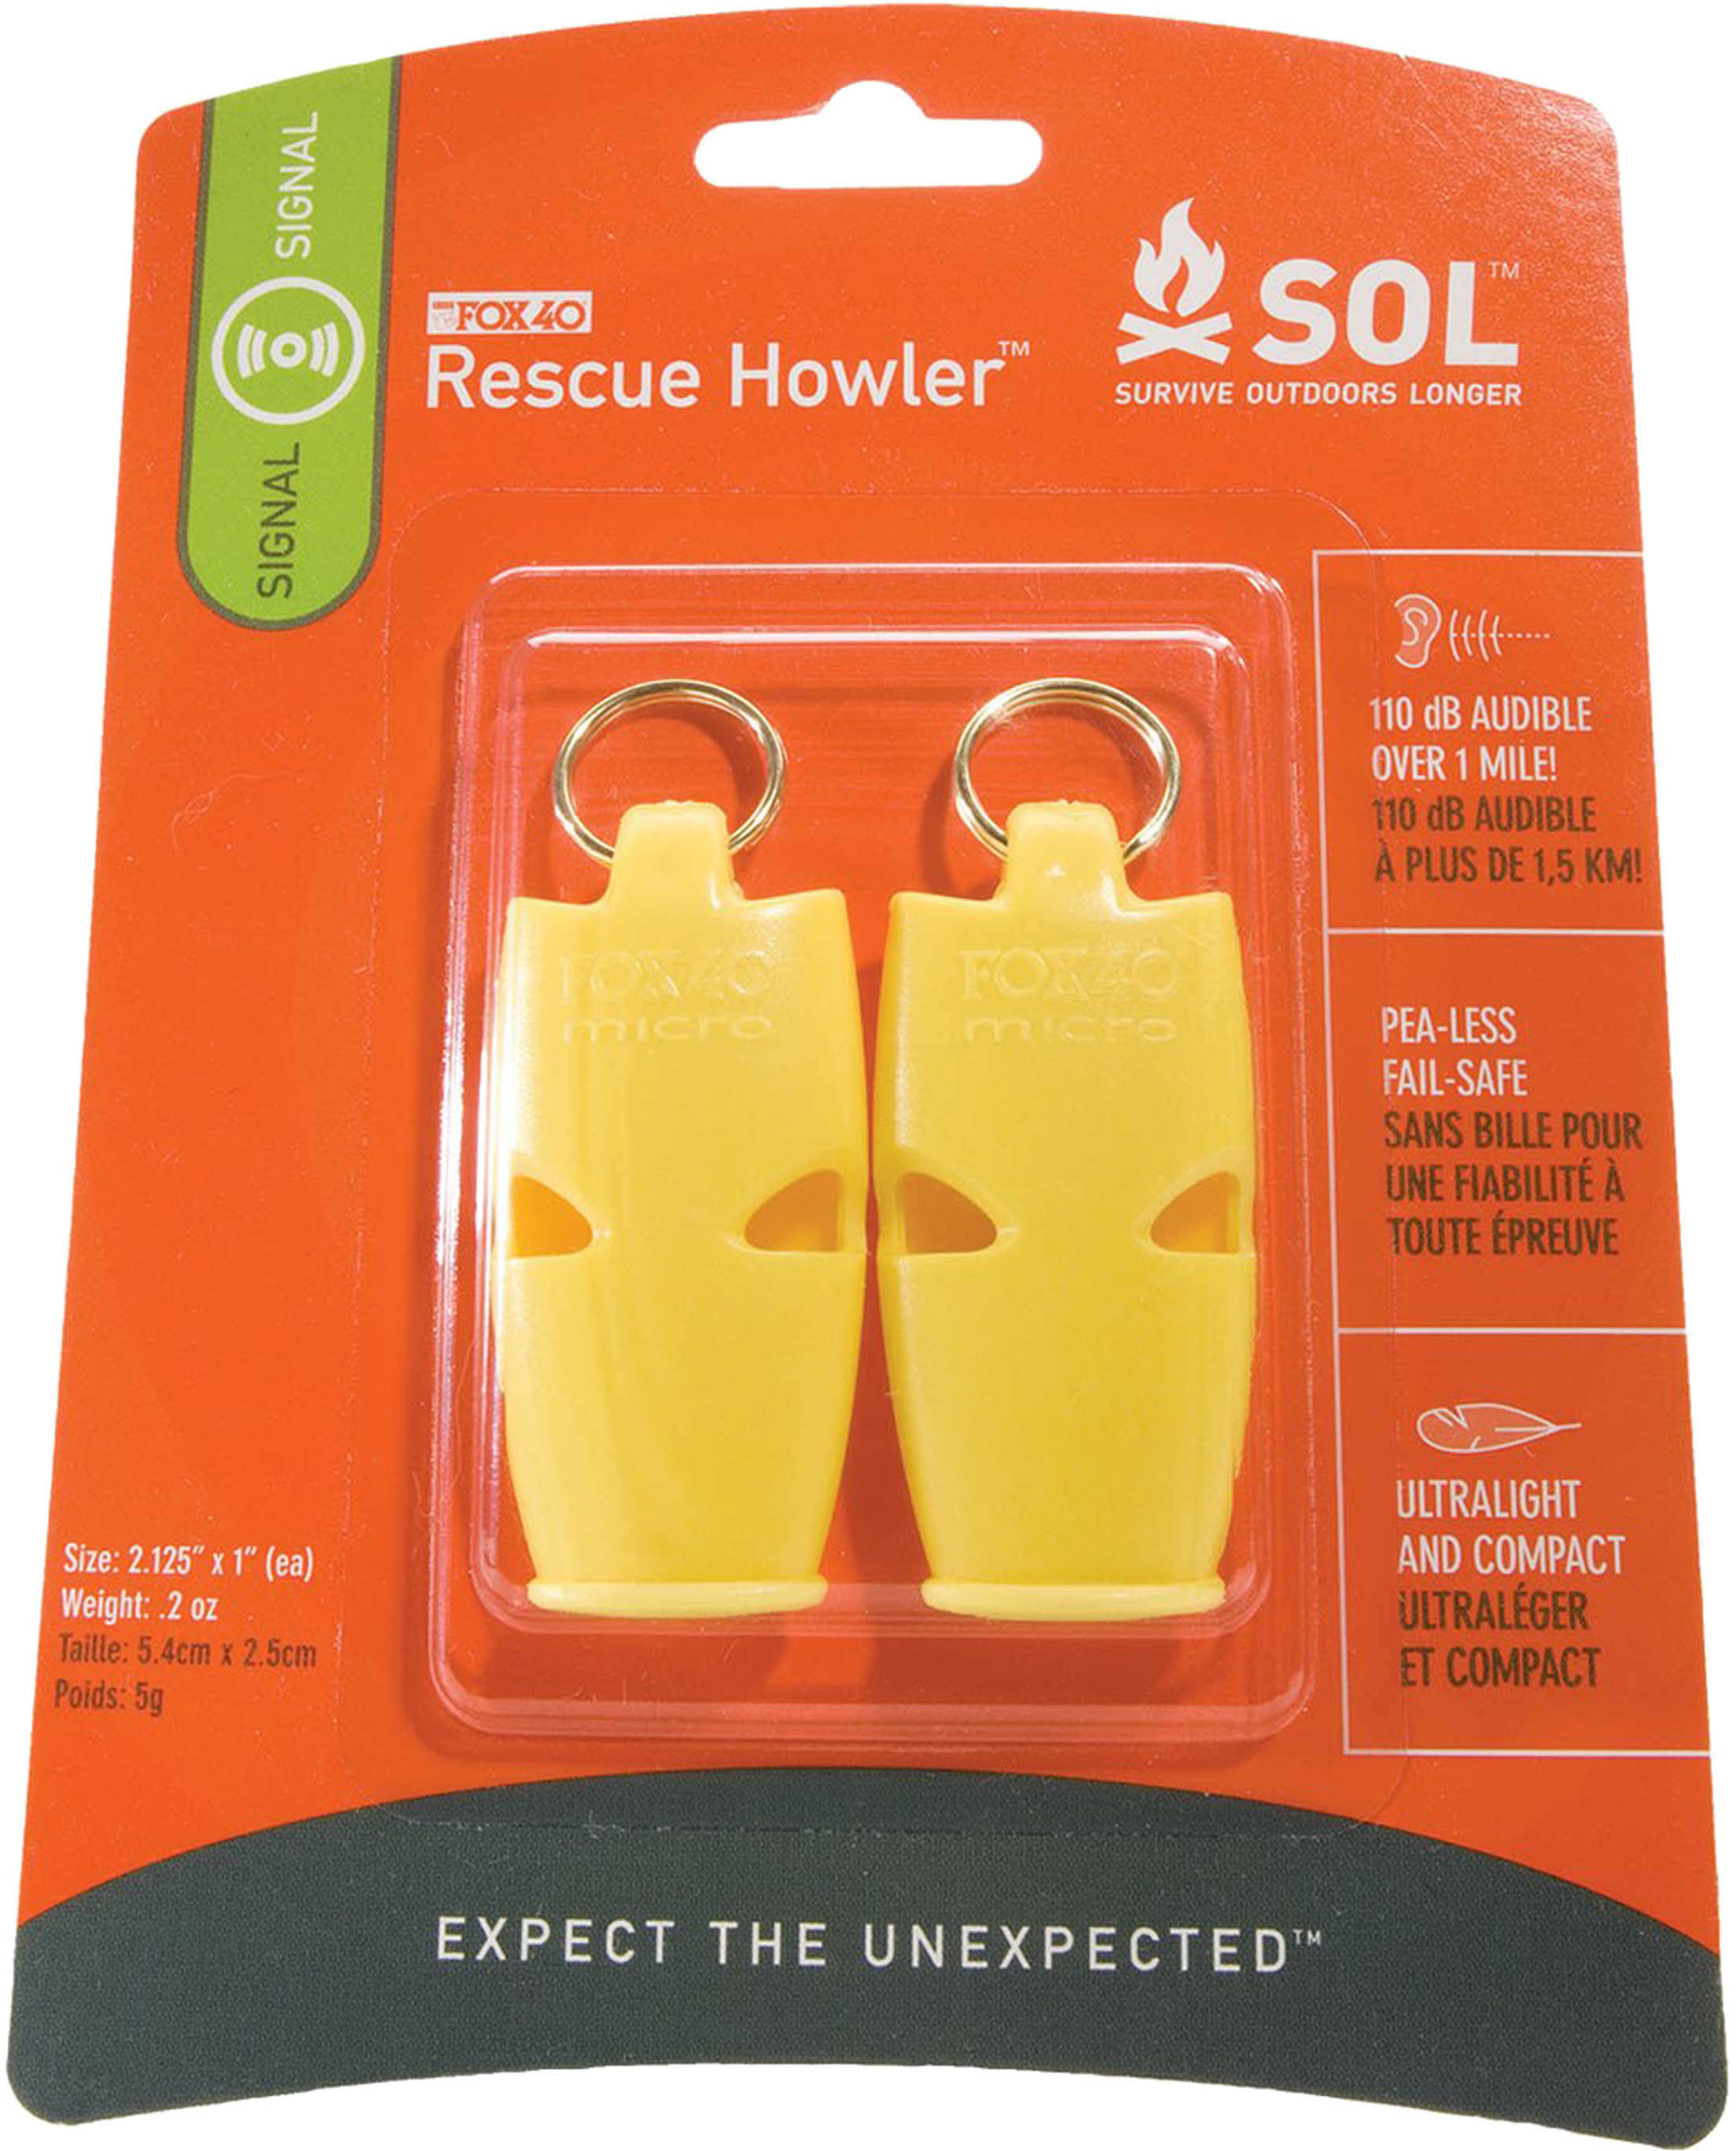 Survive Outdoors Longer / Tender Corp Adventure Medical SOL Series Rescue Howler Whistle/2 0140-1002